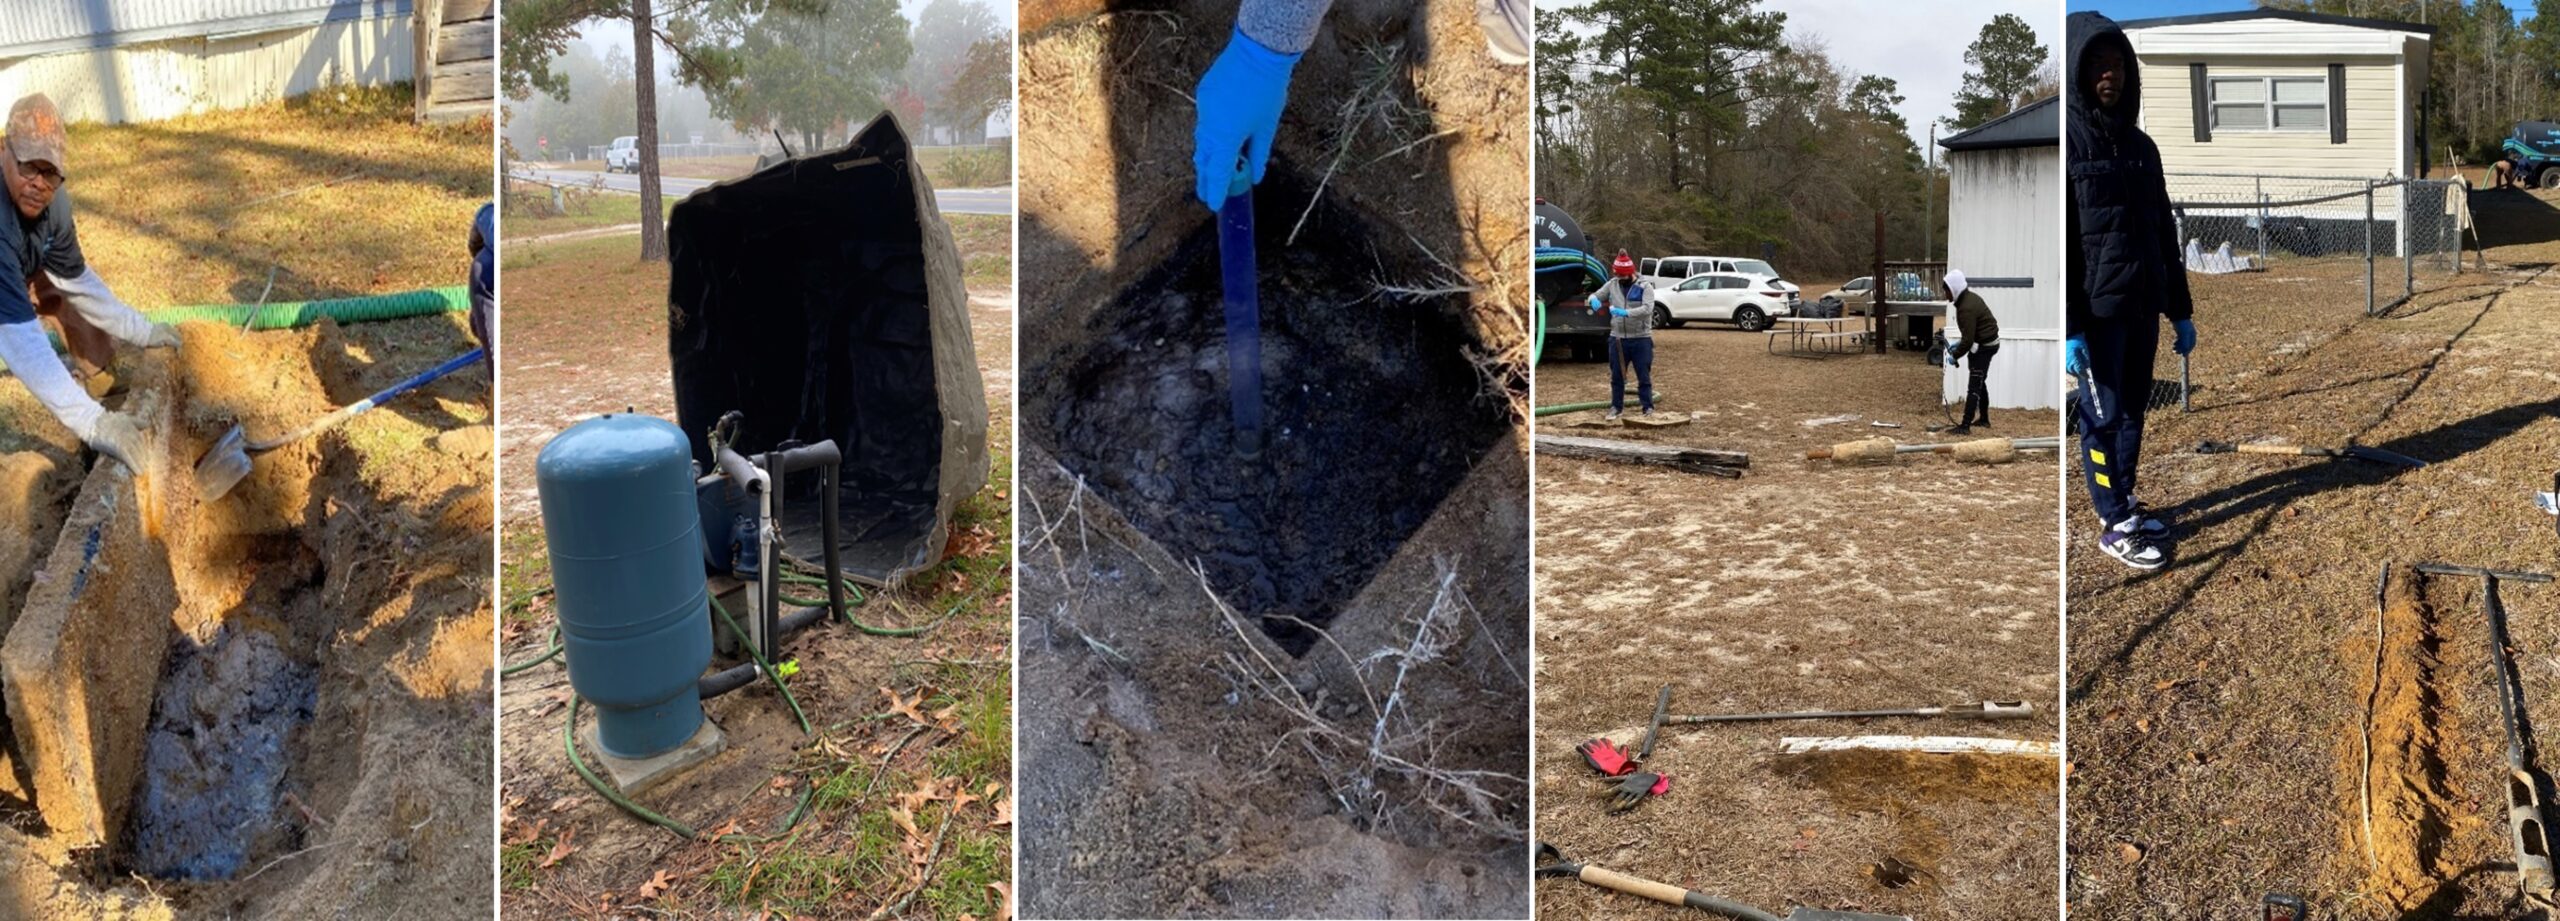 You are currently viewing Occurrence and concentrations of traditional and emerging contaminants in onsite wastewater systems and water supply wells in eastern North Carolina, USA